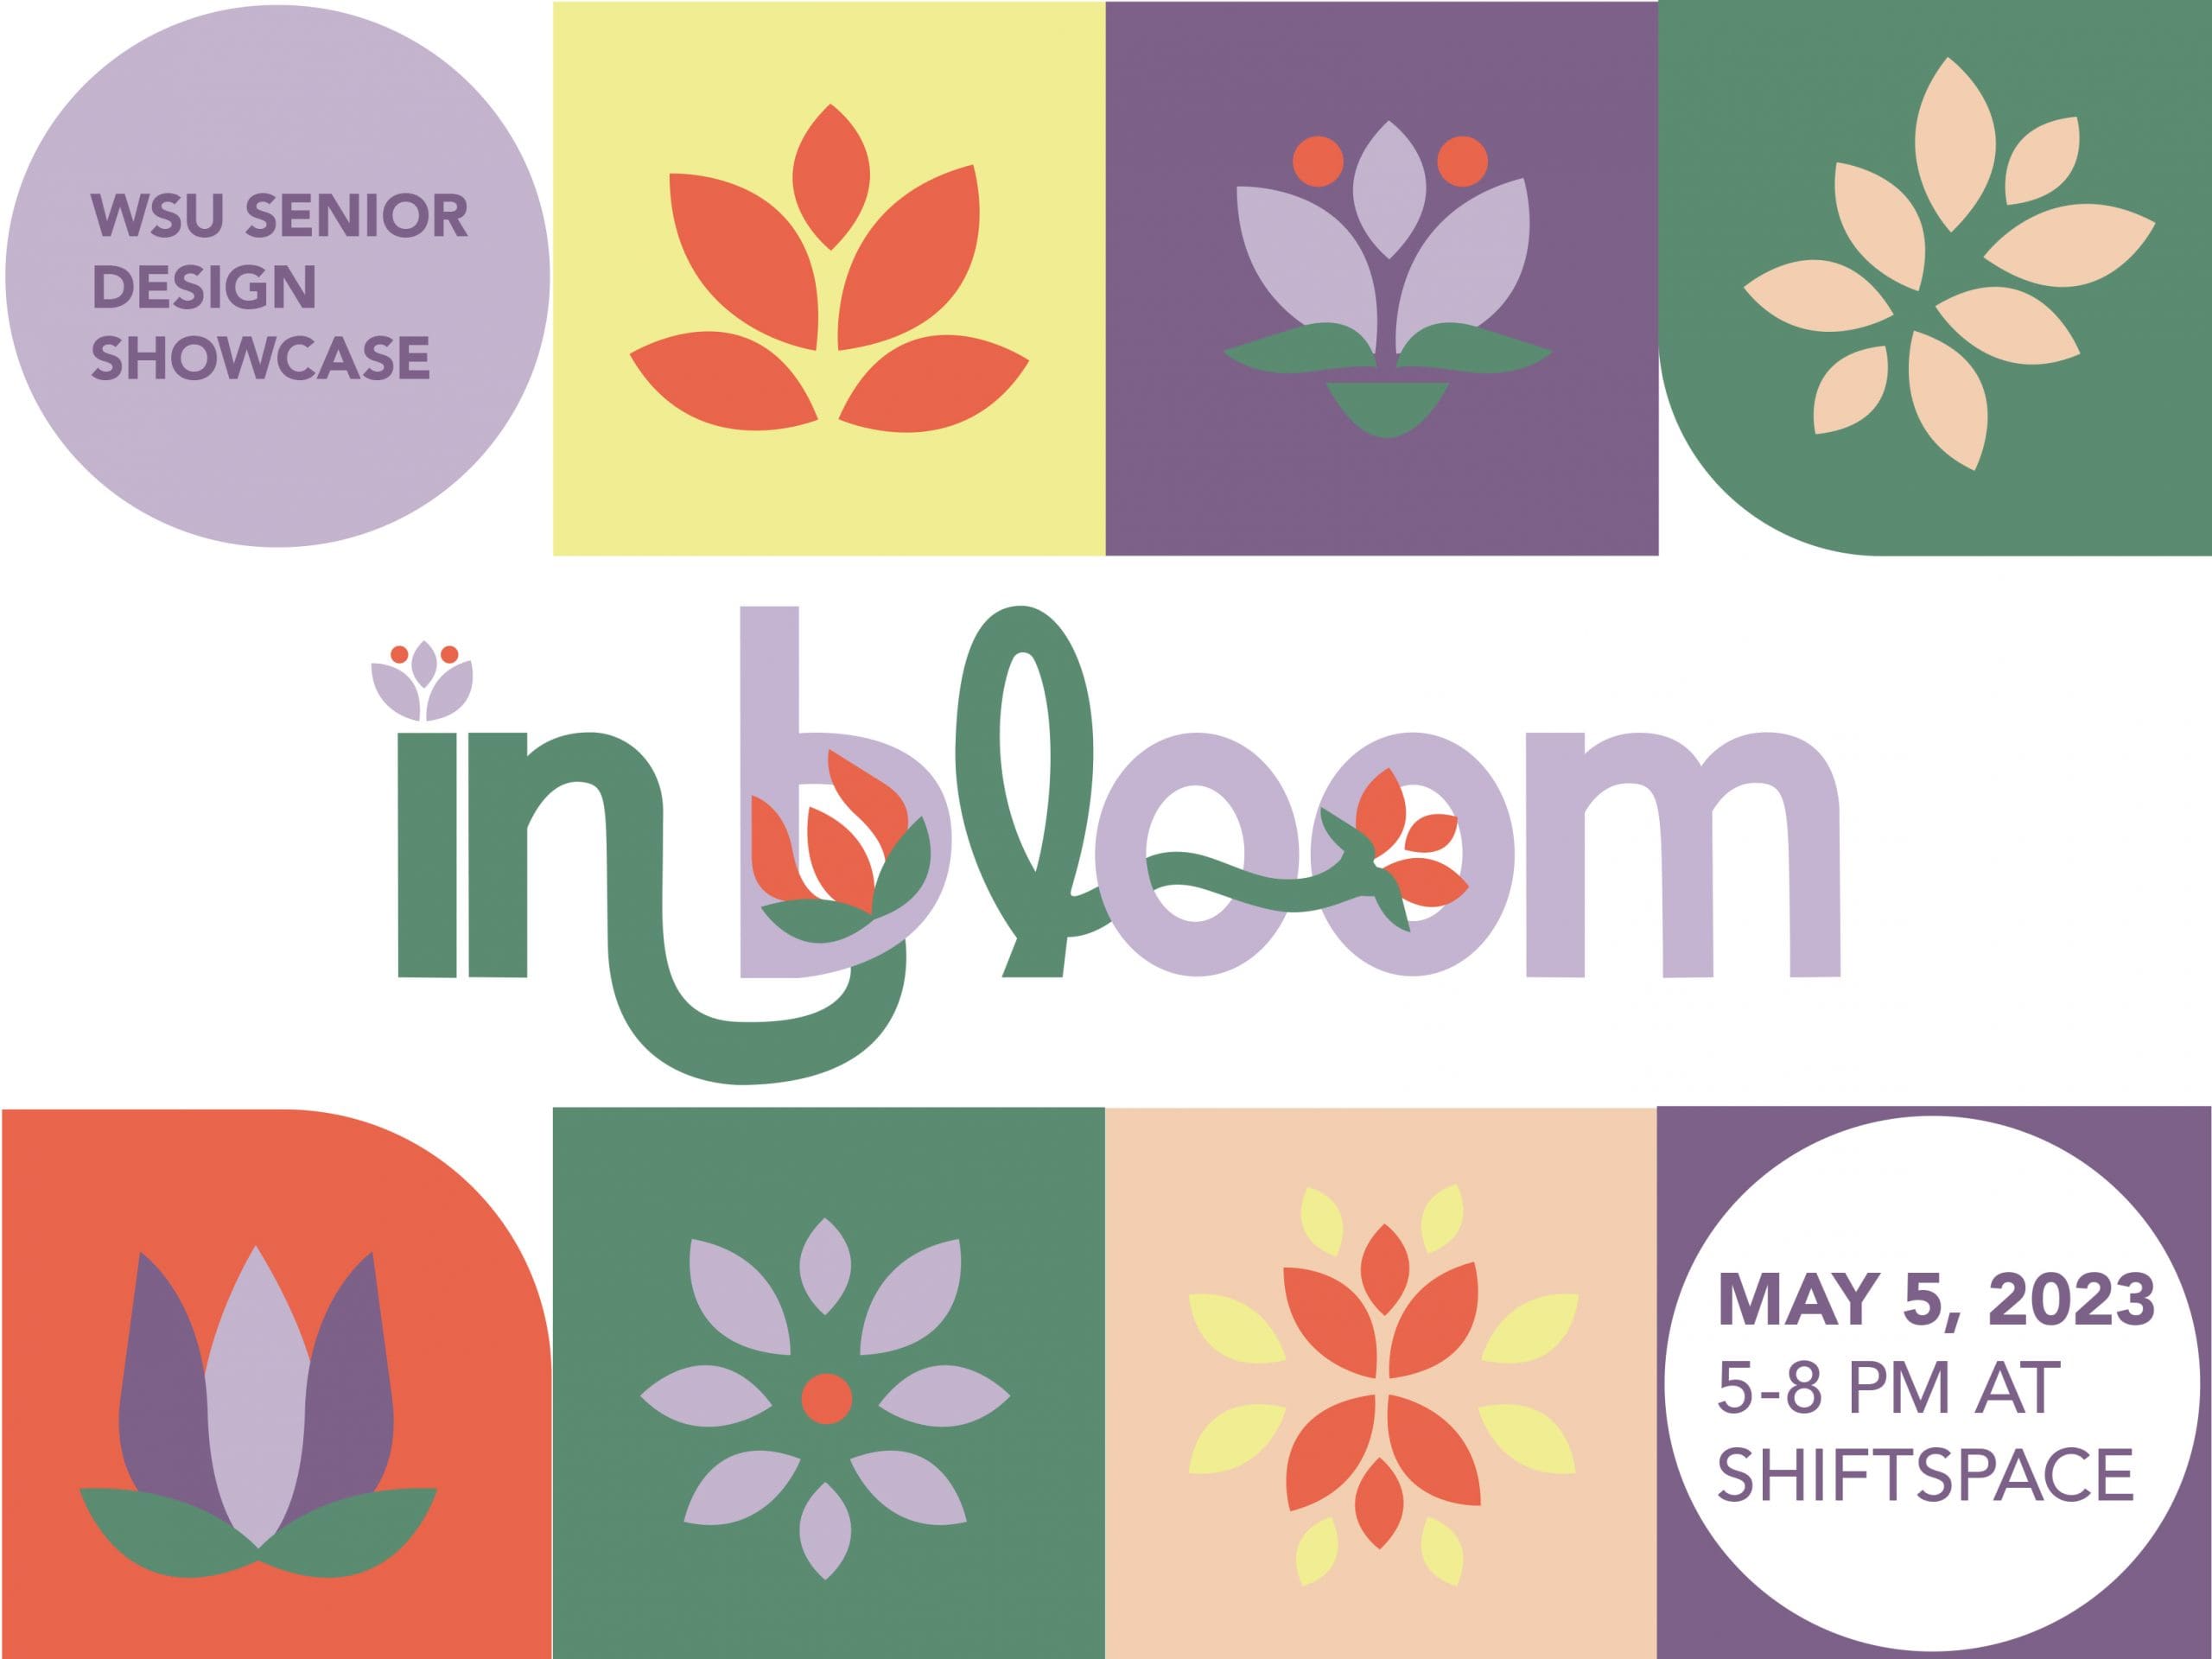 Icons of flowers, pastel purple, dark purple green, pink, yellow, red with the text, "WSU senior design showcase | In Bloom | May 5, 2023 5-8 pm at ShiftSpace."